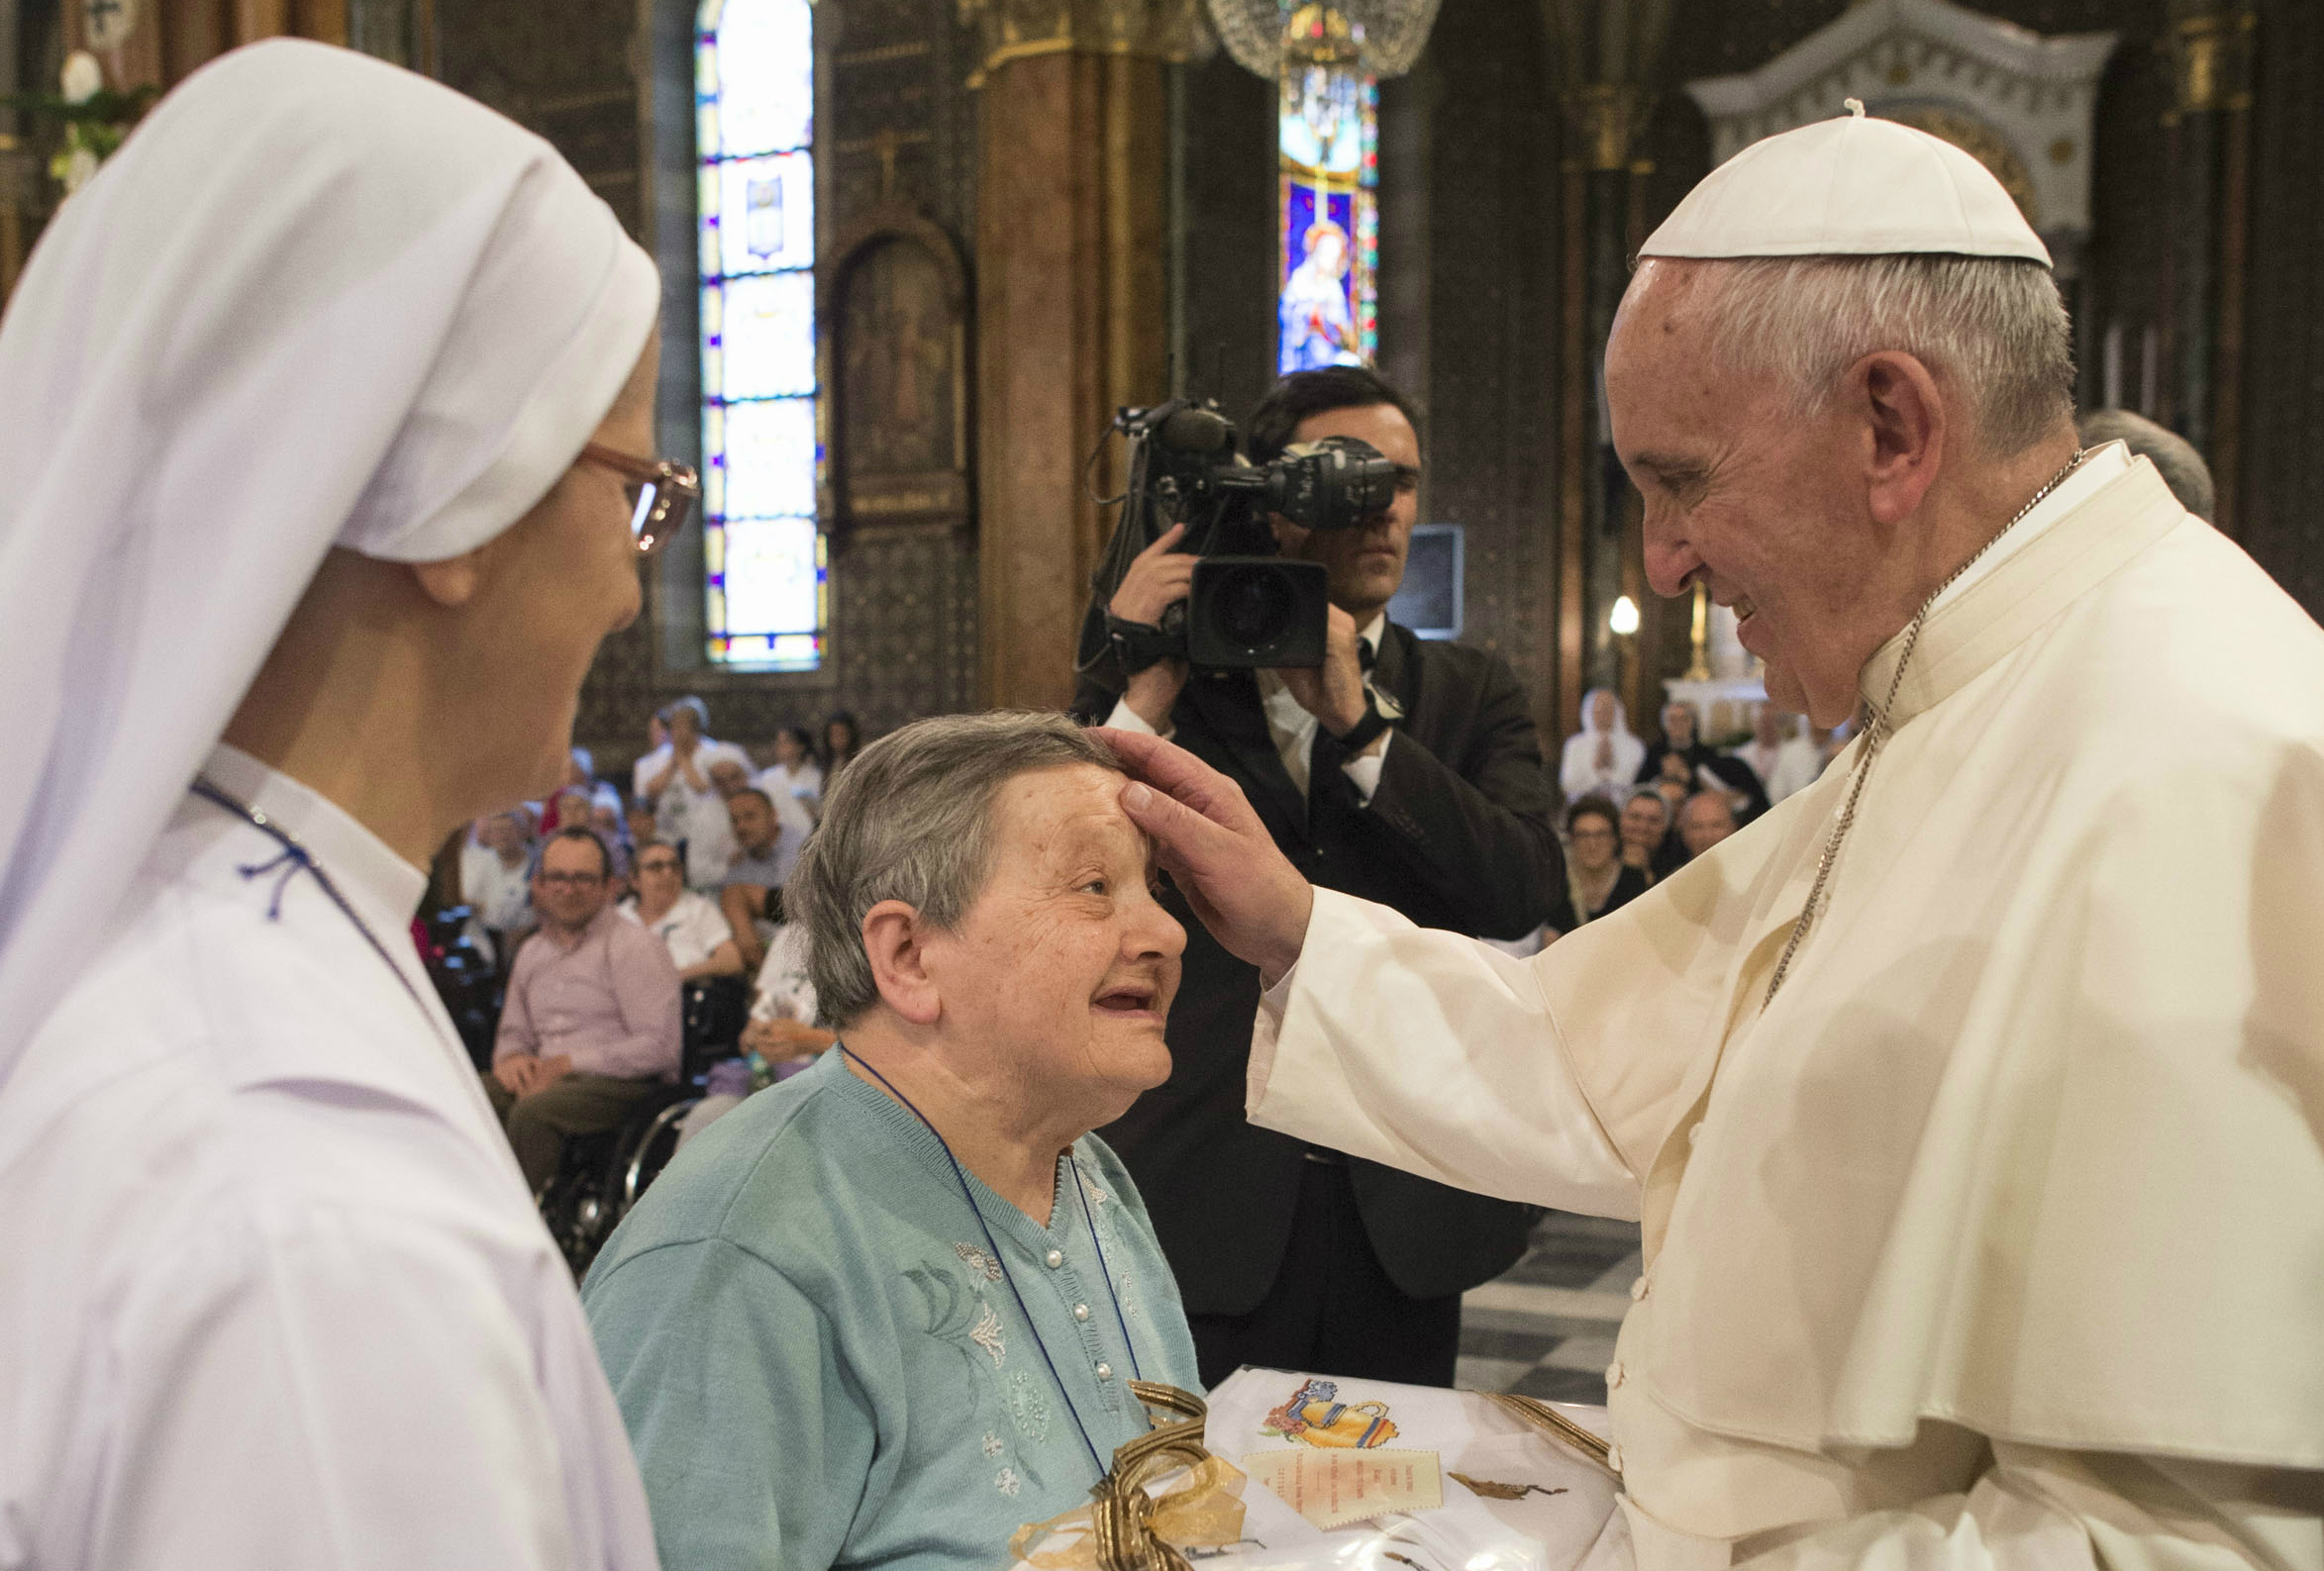 Pope Francis during his encounter with meets sick